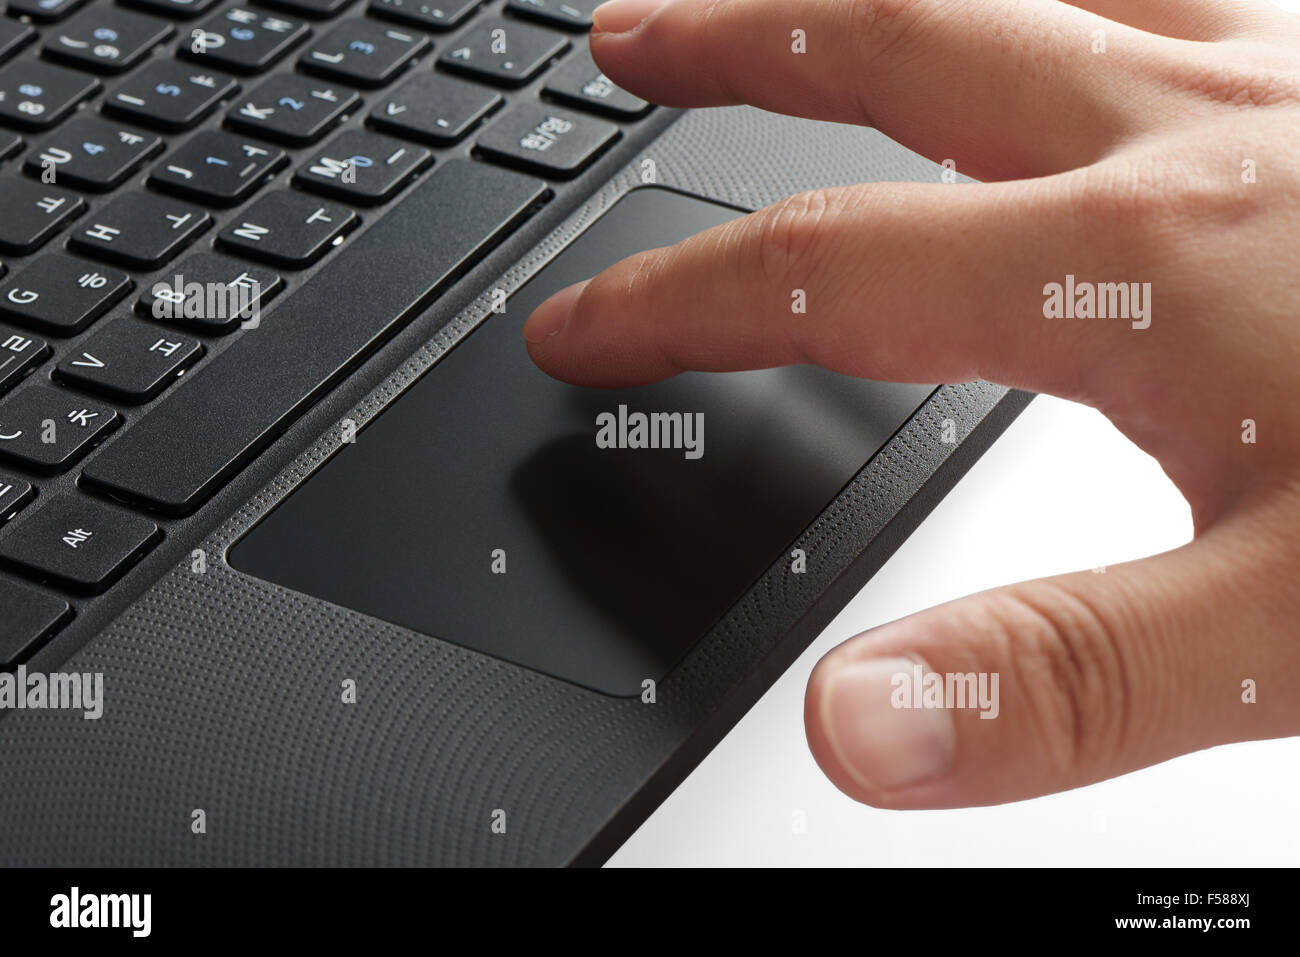 closeup of keypad and touchpad of a laptop computer with index fingers touching the touchpad Stock Photo